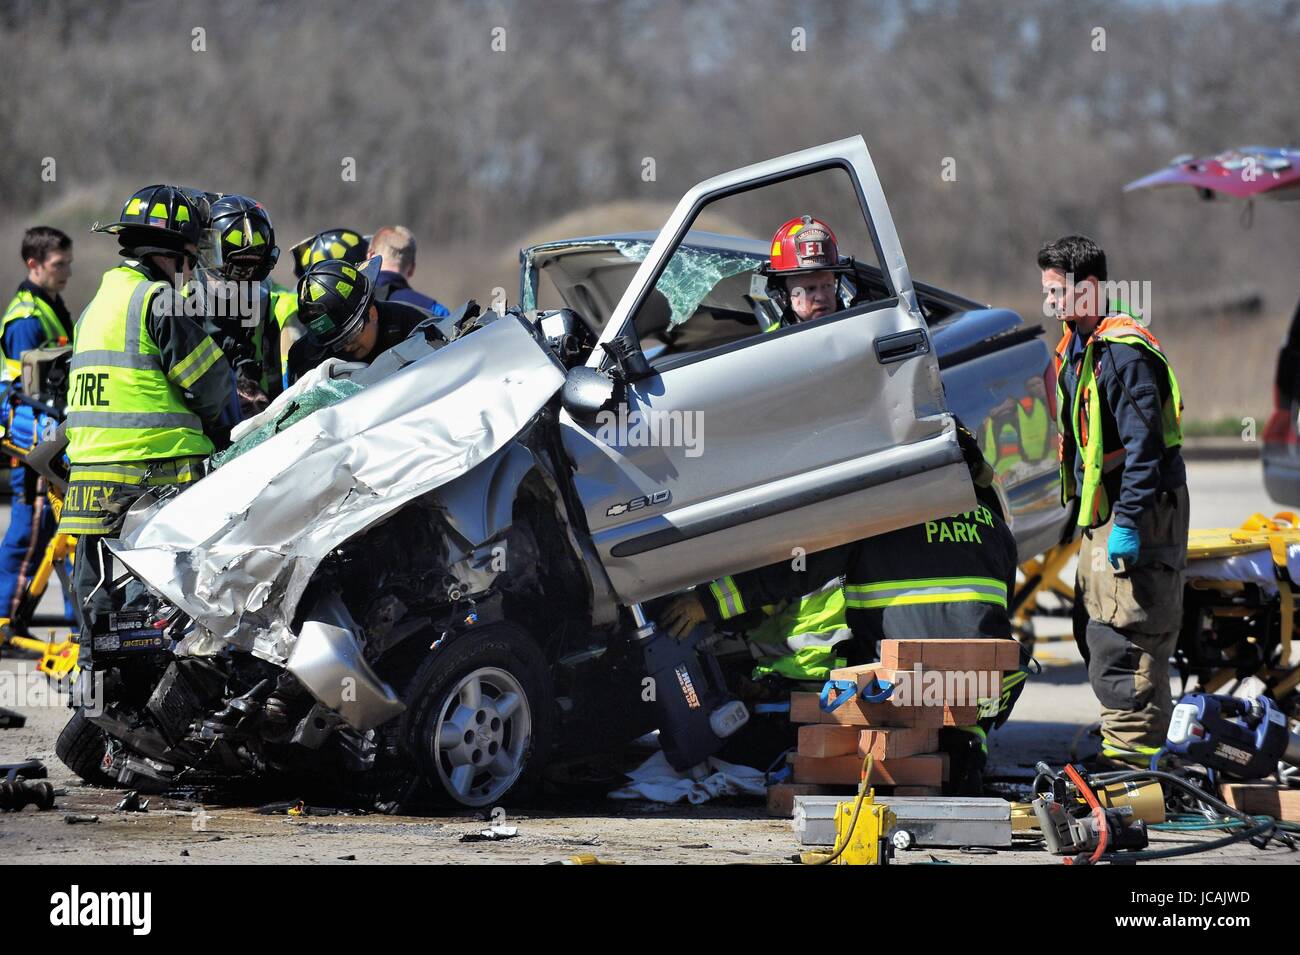 The residue of a serious, high speed car crash is surveyed by firefighters and paramedics as they worked to extricate a victim from the debris. USA. Stock Photo